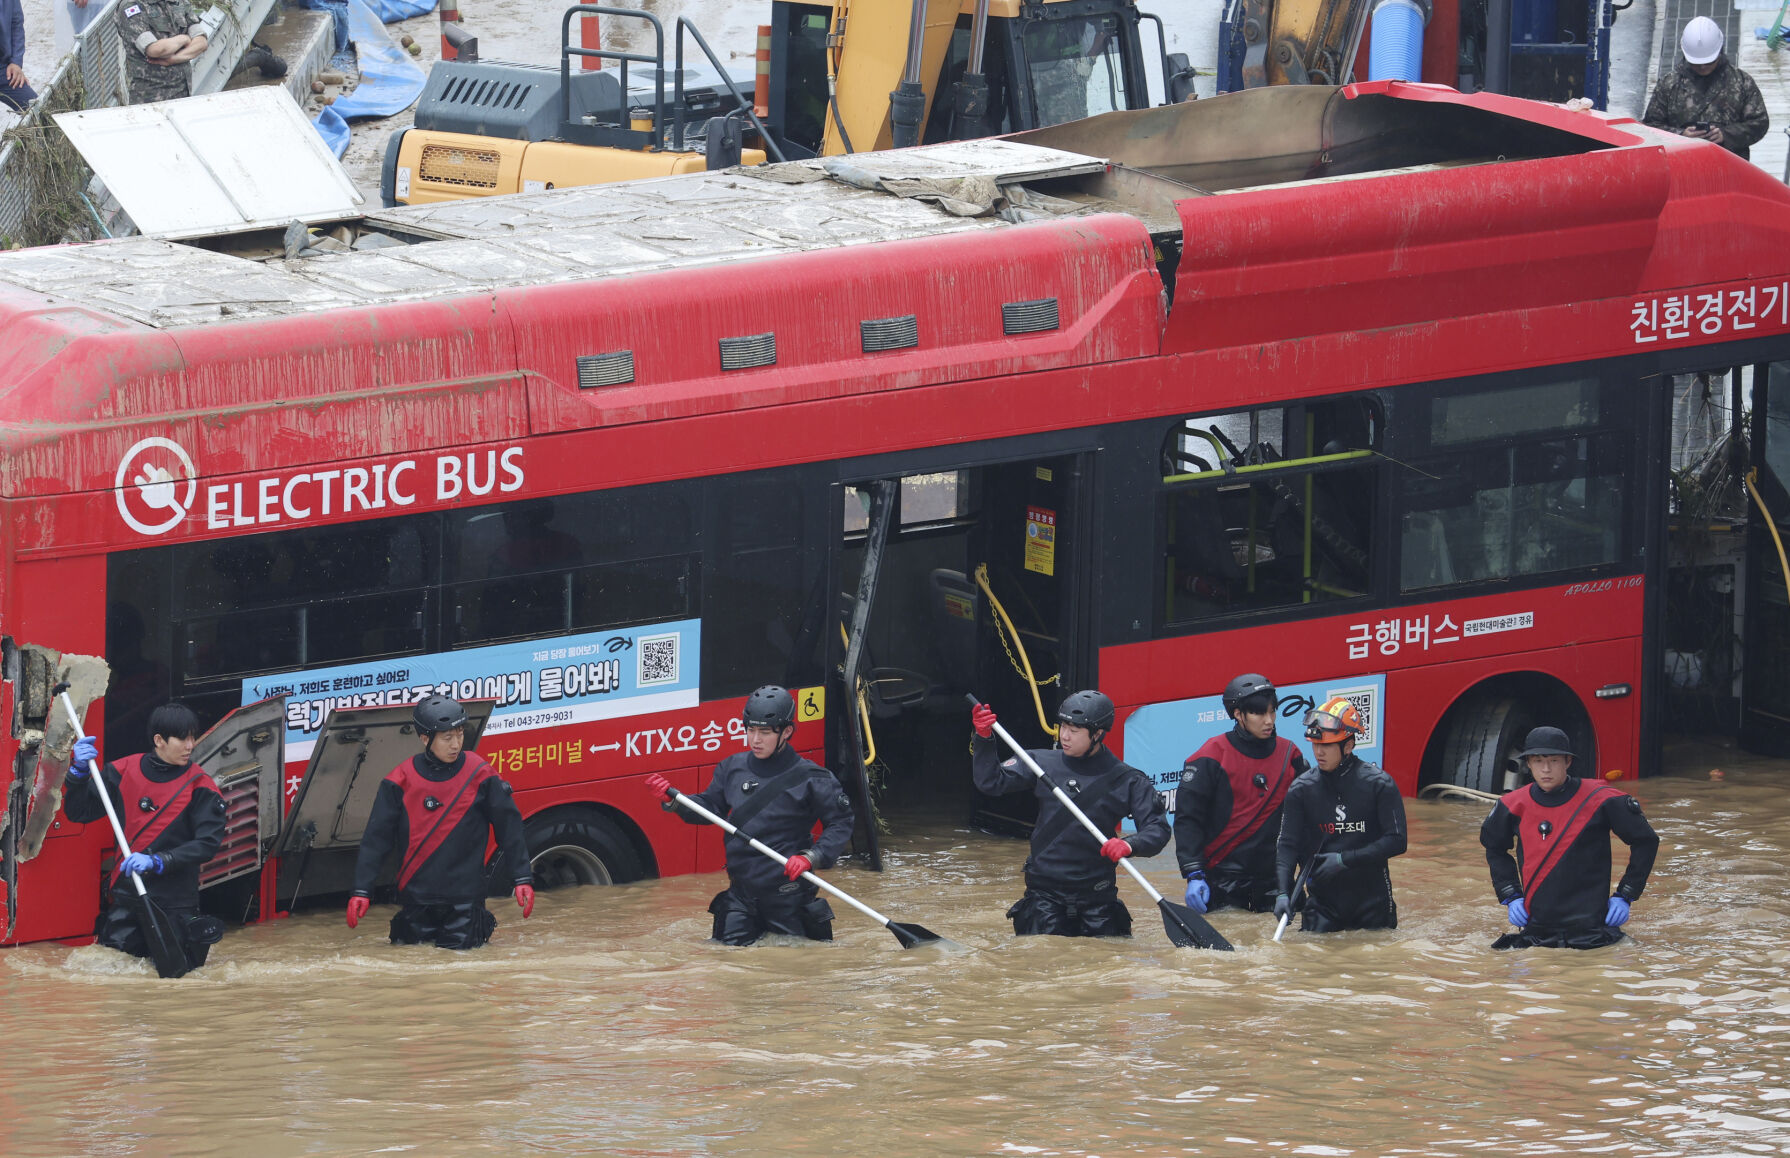 <p>FILE - Rescuers conduct a search operation along a road submerged by floodwaters leading to an underground tunnel in Cheongju, South Korea, July 16, 2023. Countries in the Asia-Pacific region needs to drastically increase their investments in disaster warning systems and other tools to counter rising risks from climate change, a United Nations report said Tuesday, July 25, 2023. (Kim Ju-hyung/Yonhap via AP, File)</p>   PHOTO CREDIT: Kim Ju-hyung